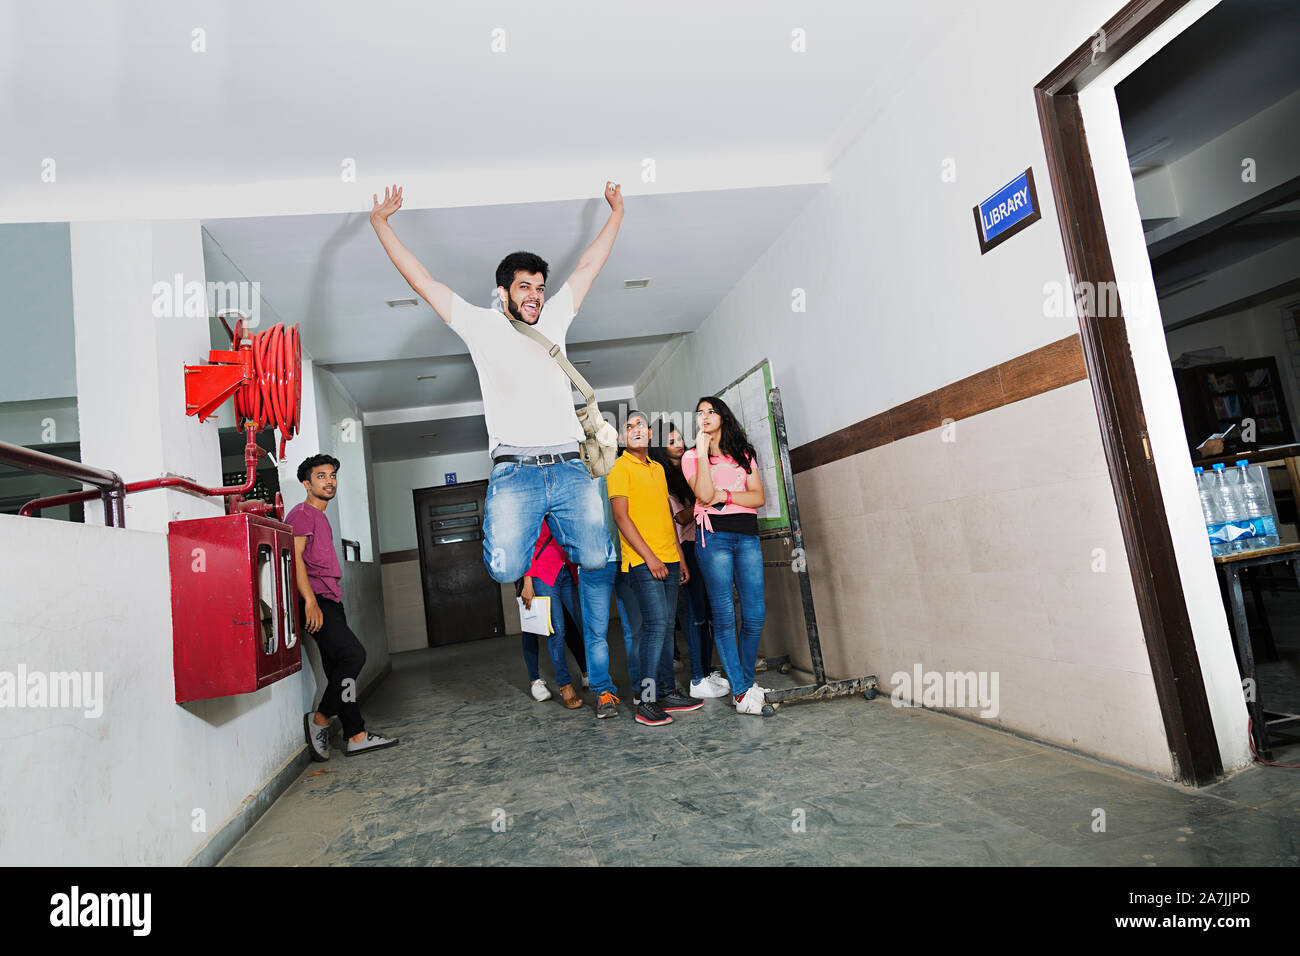 Young Boy College Student Jumping Celebrate their result With Classmates in-College Campus Stock Photo